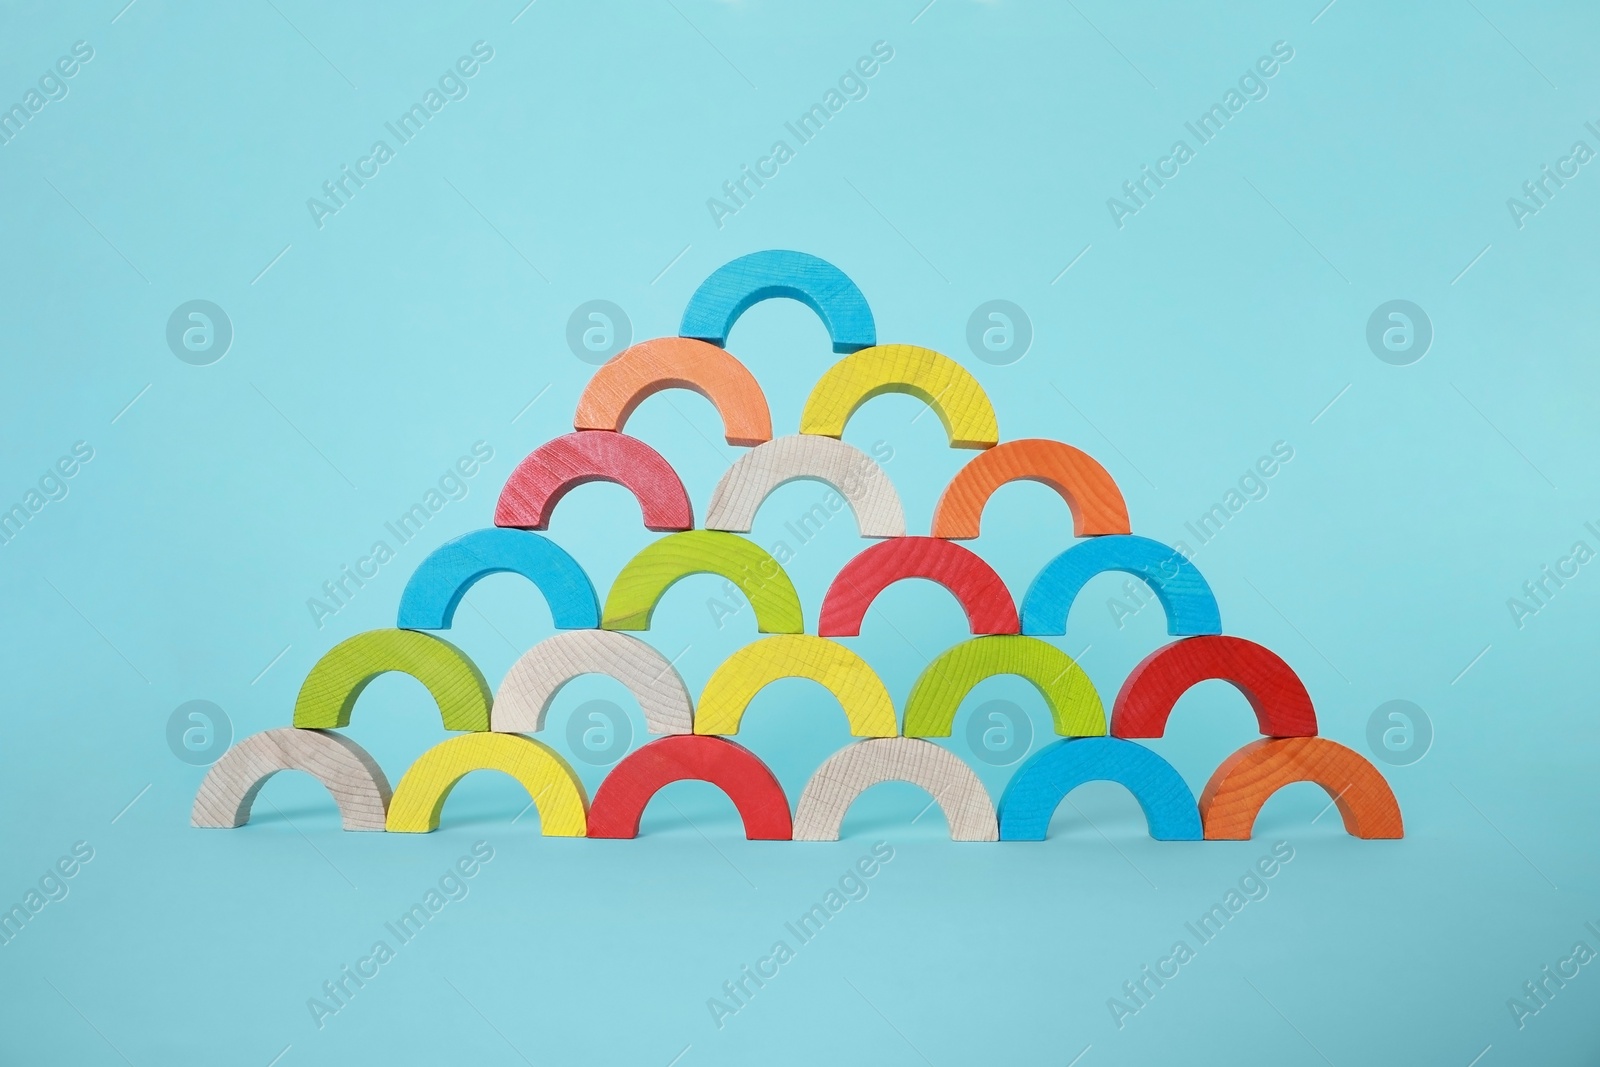 Photo of Colorful wooden pieces of playing set on light blue background. Educational toy for motor skills development